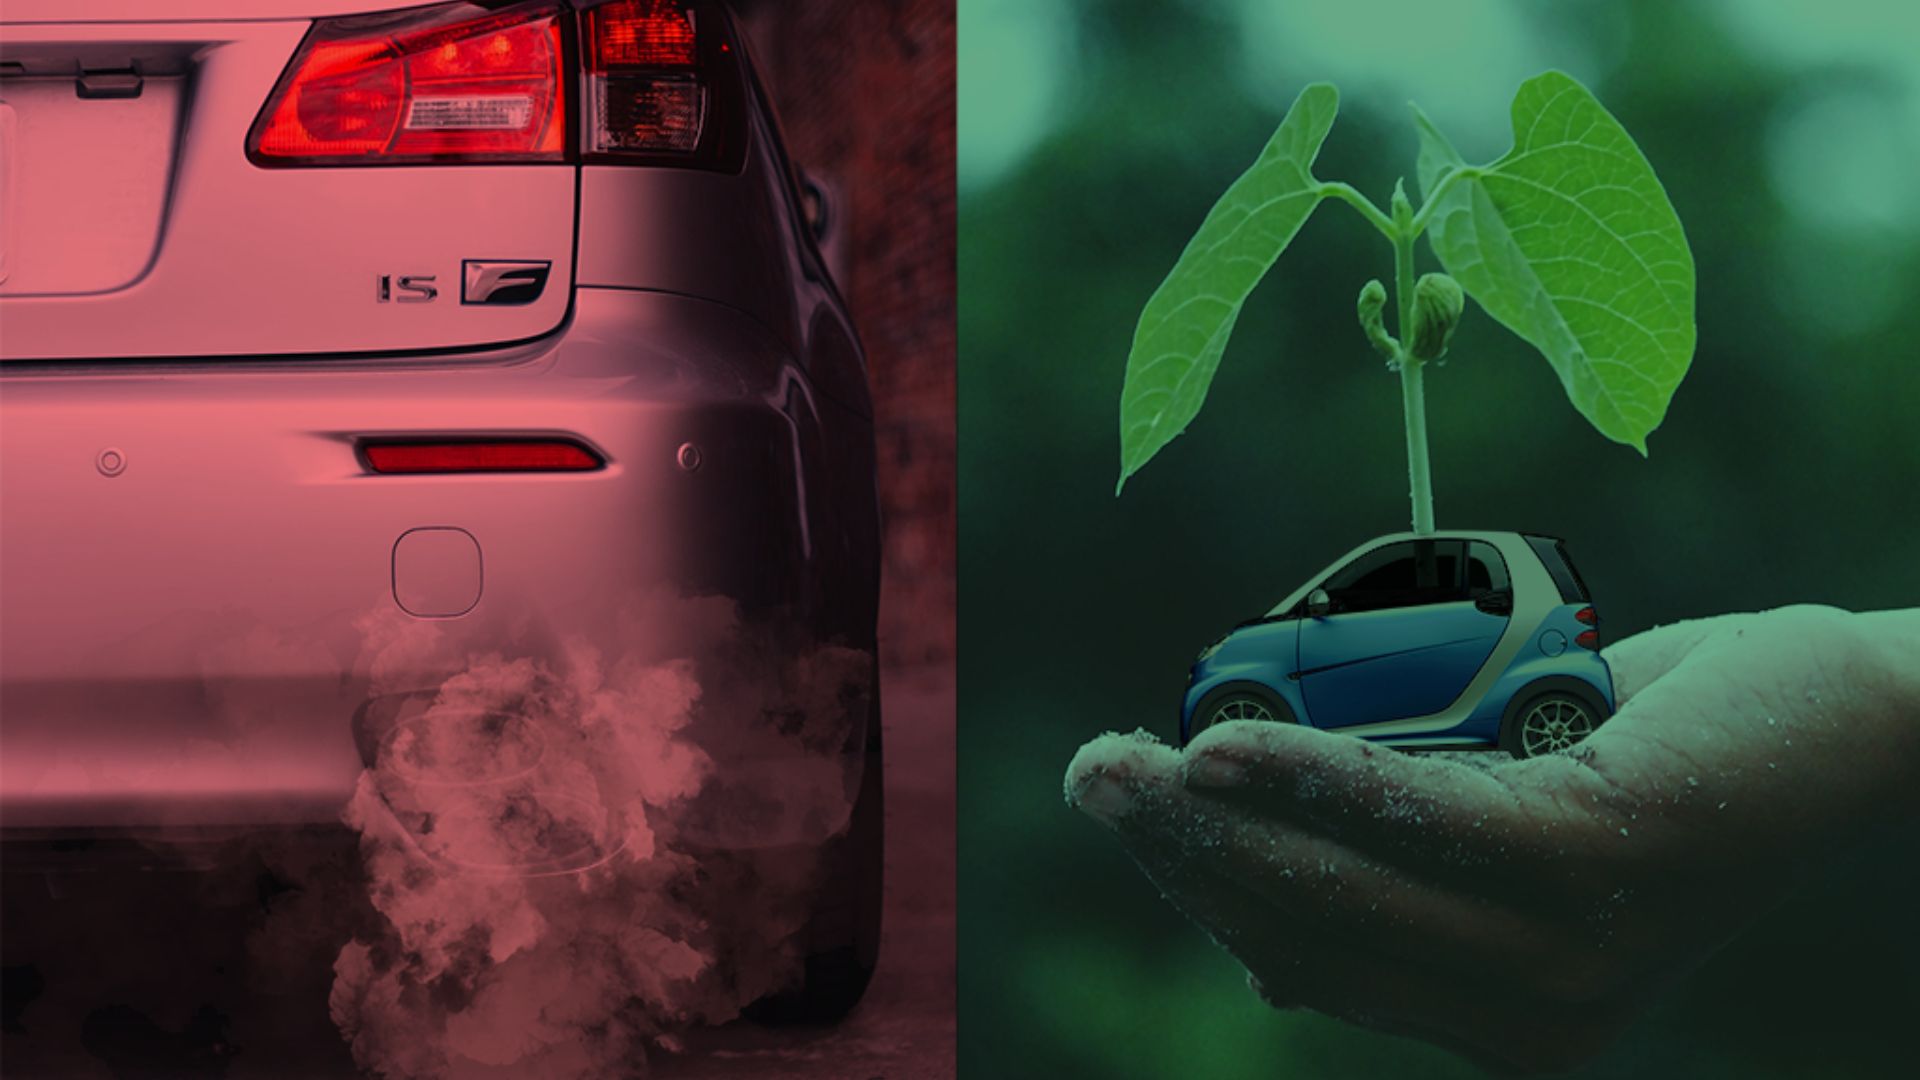 vehicle polluting the environment (left), vehicle under a tree concept (right)